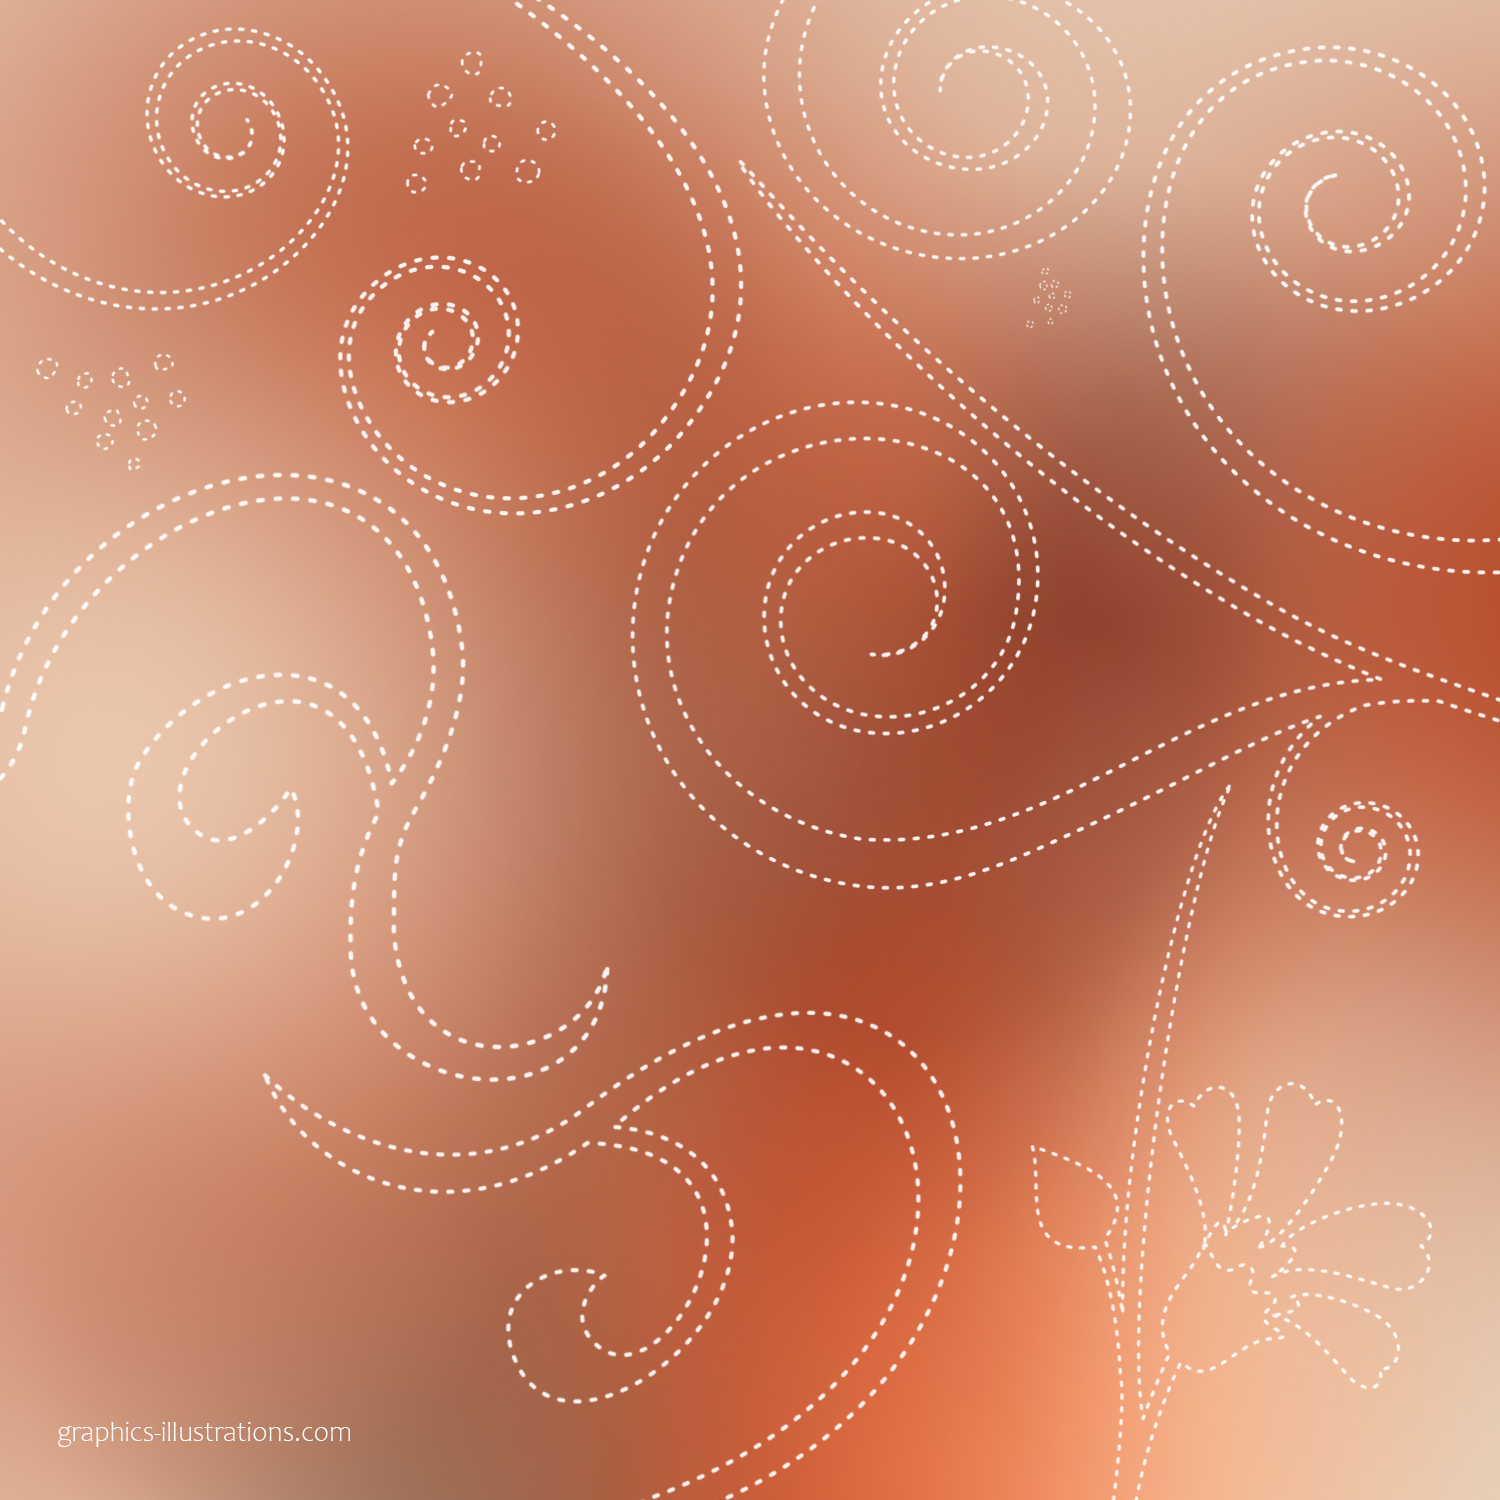 Free download Photoshop floral and swirls brushes, dashed outline